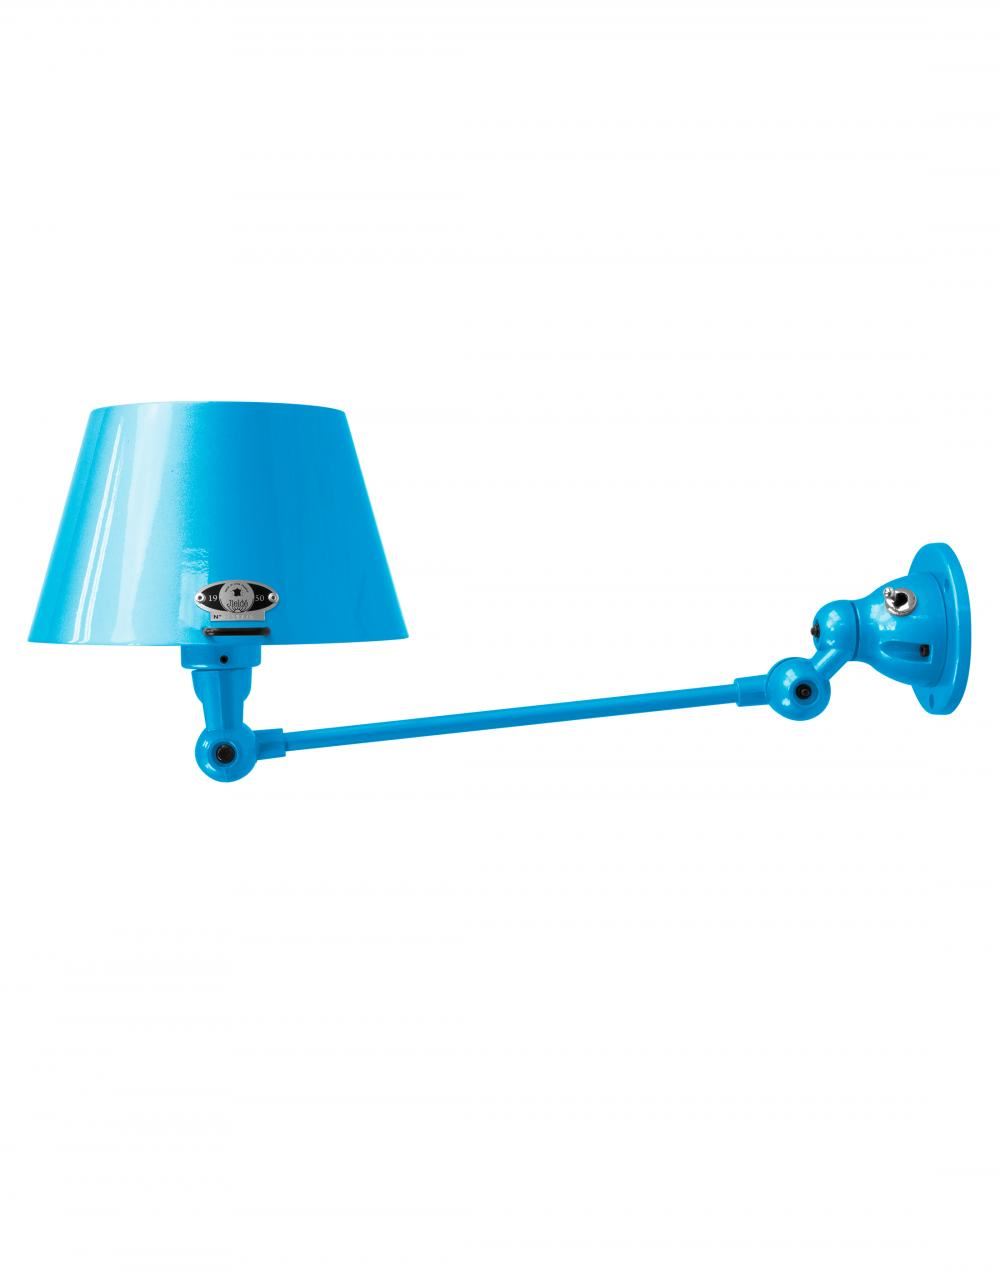 Jielde Aicler One Arm Adjustable Wall Light Straight Shade Light Blue Gloss Integral Switch On Wall Base